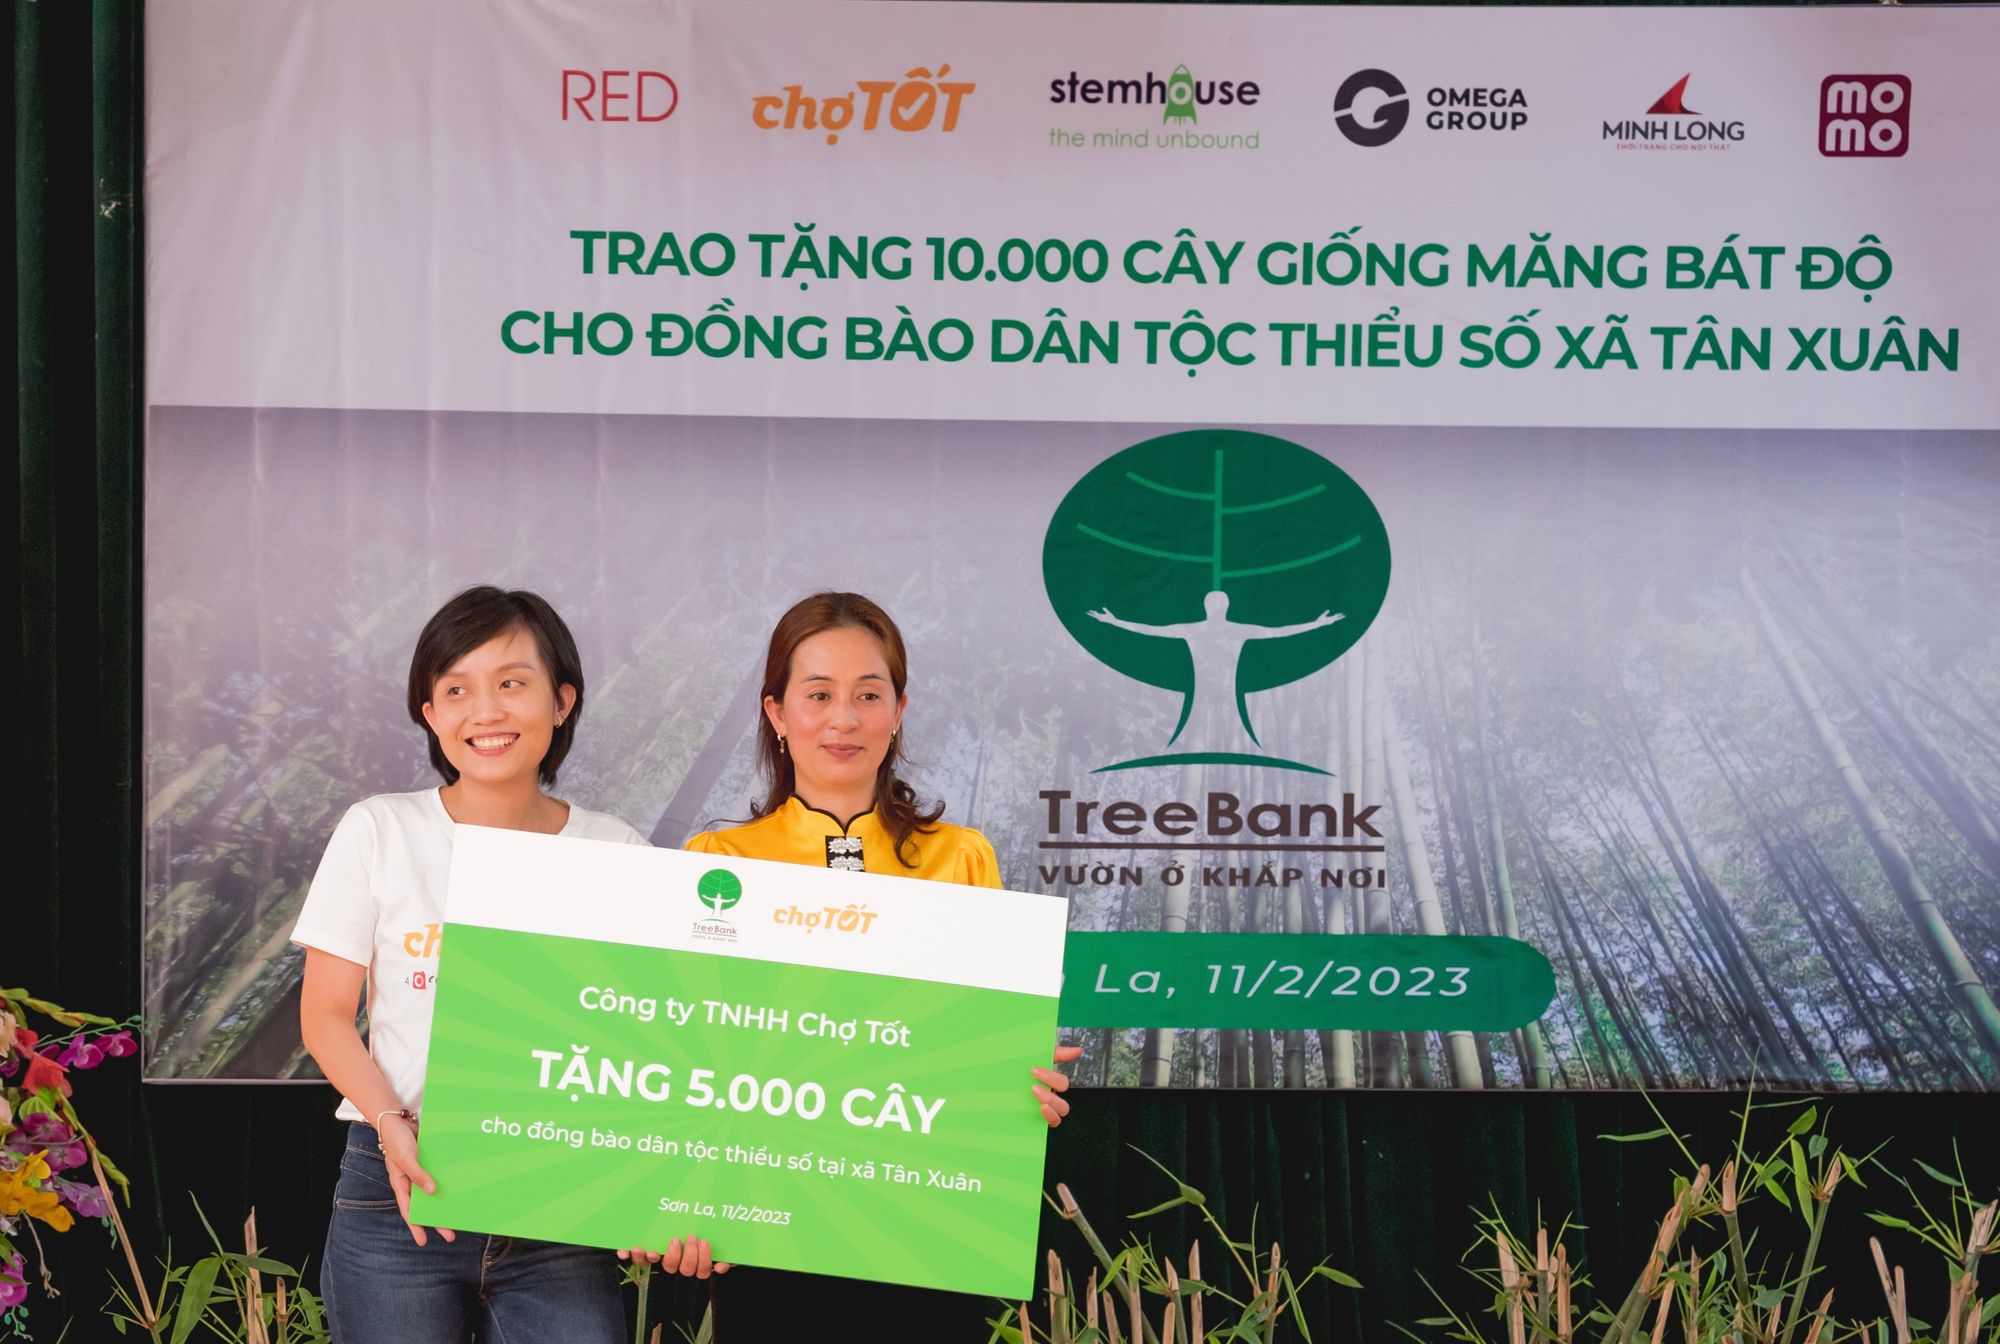 "Cao Thủ Góp Cây” - We join hands to make good impact on society